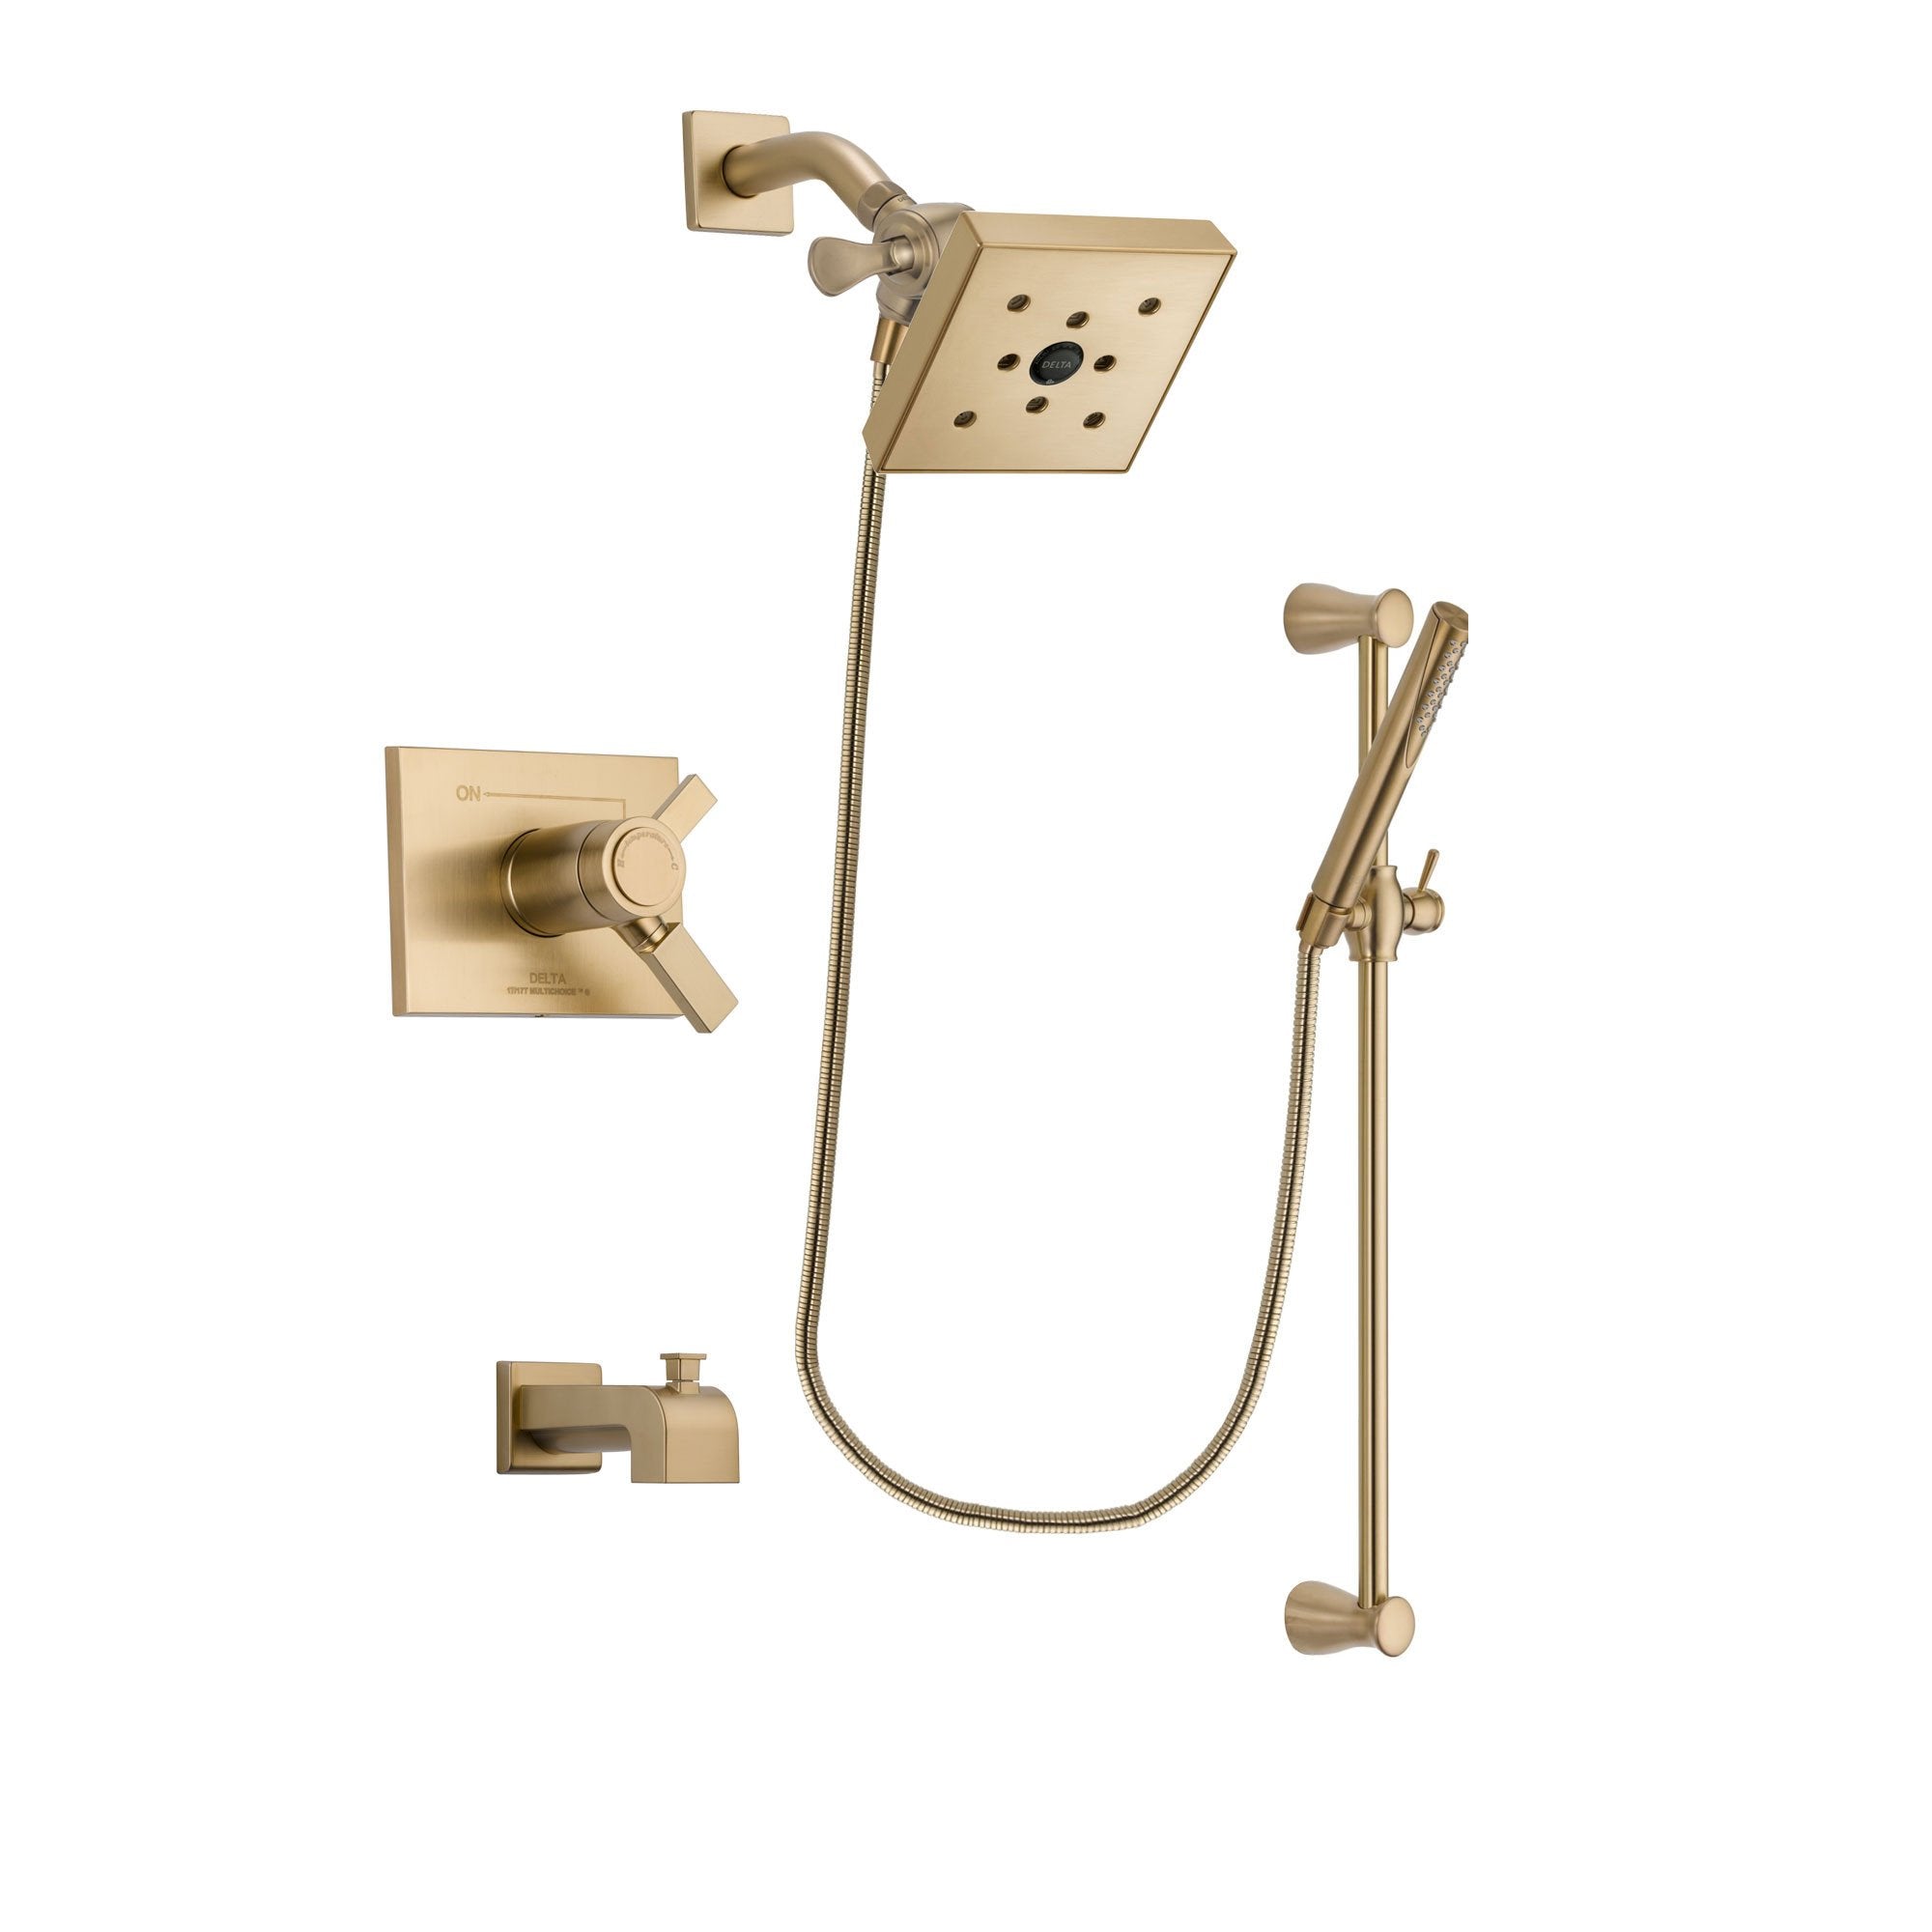 Delta Vero Champagne Bronze Finish Thermostatic Tub and Shower Faucet System Package with Square Shower Head and Modern Handheld Shower with Slide Bar Includes Rough-in Valve and Tub Spout DSP3971V